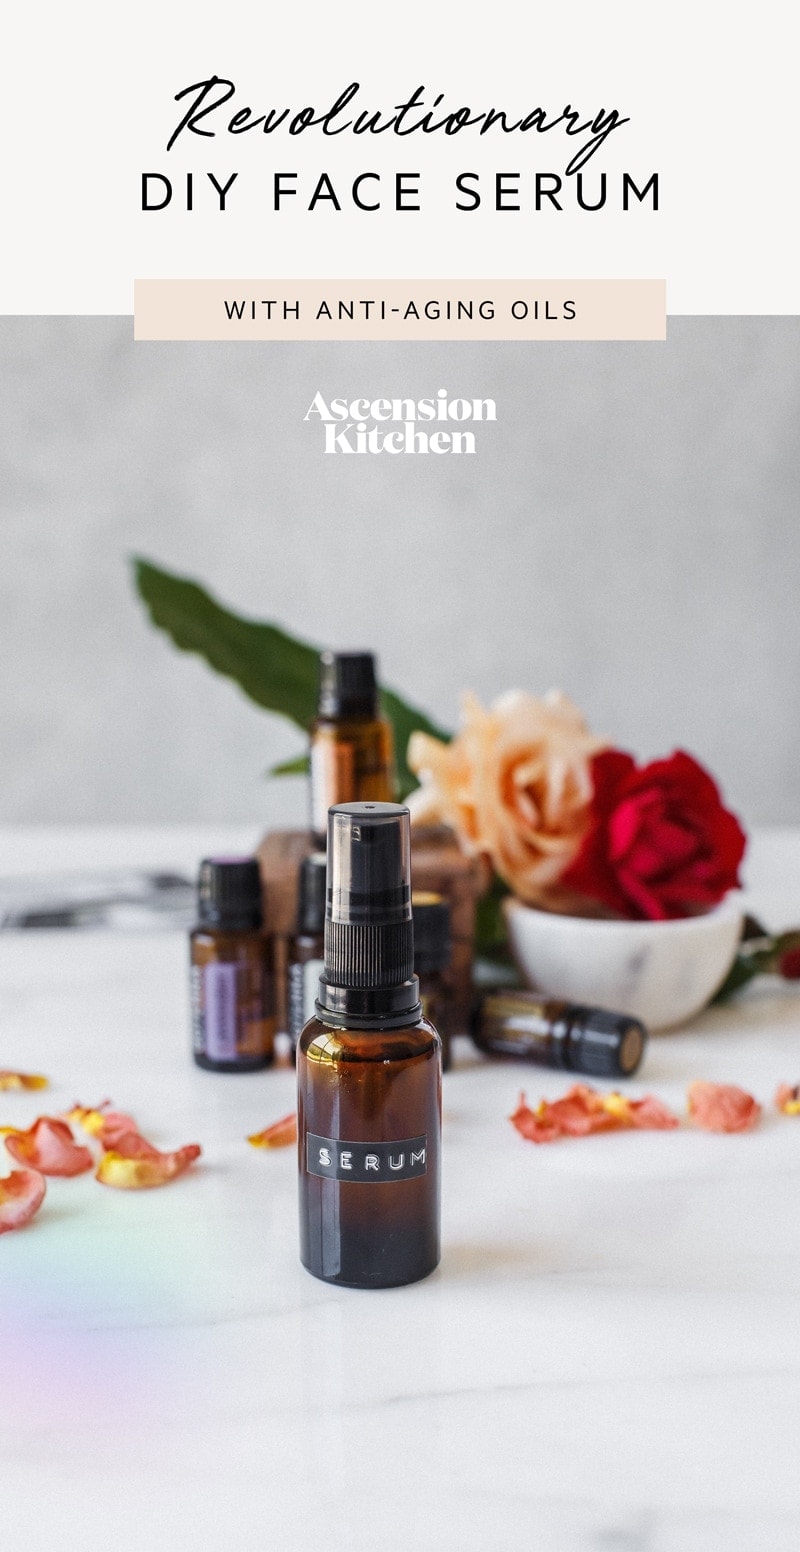 Hero shot of the face serum styled beautifully with fresh roses, the recipe title is written across the top of the image